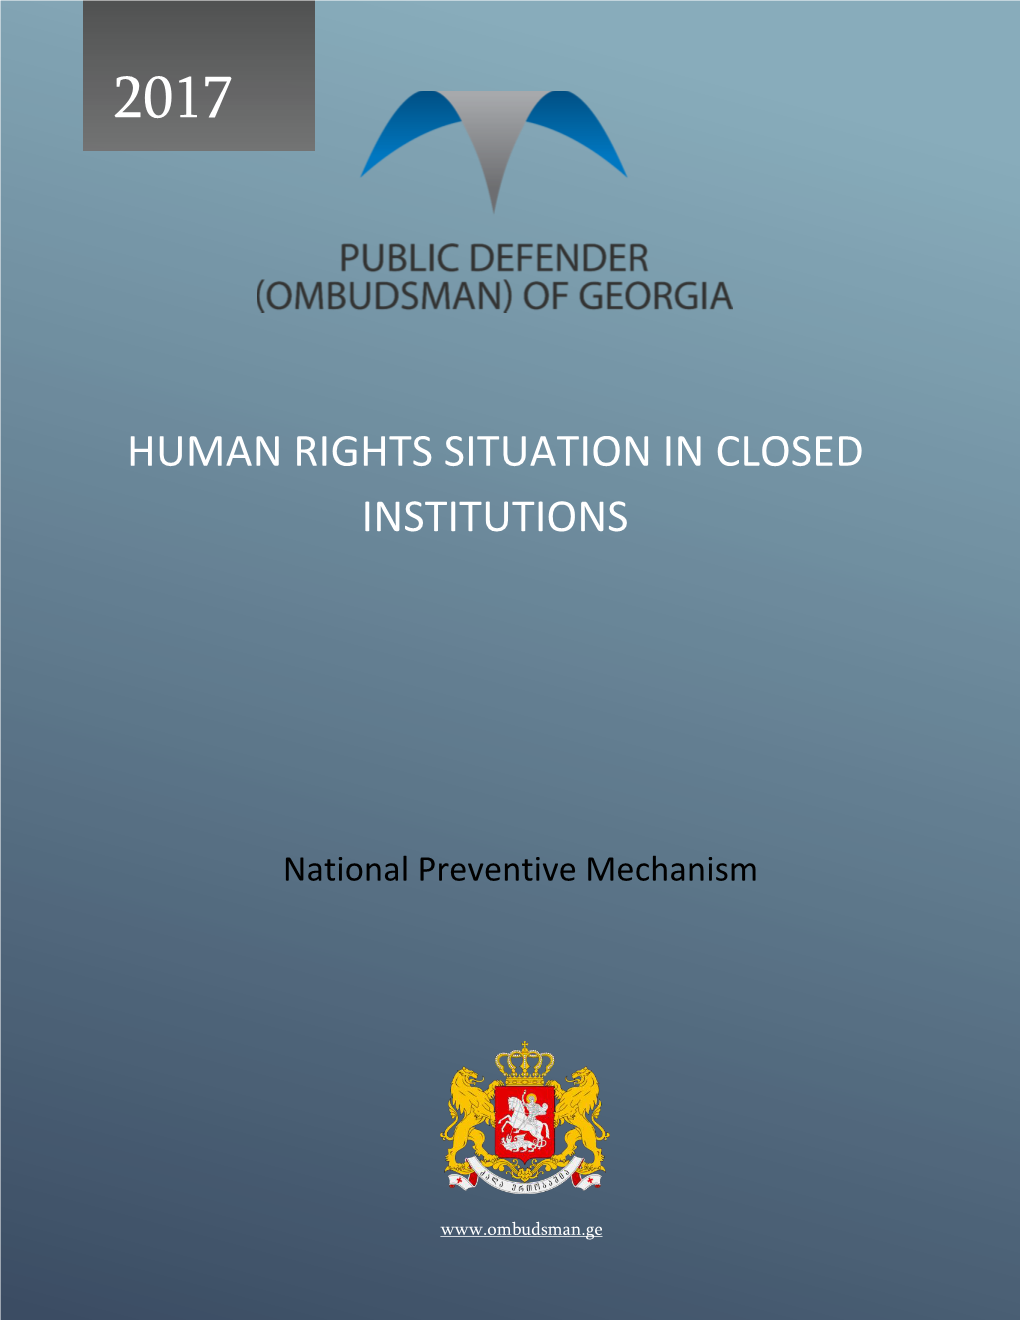 Human Rights Situation in Closed Institutions